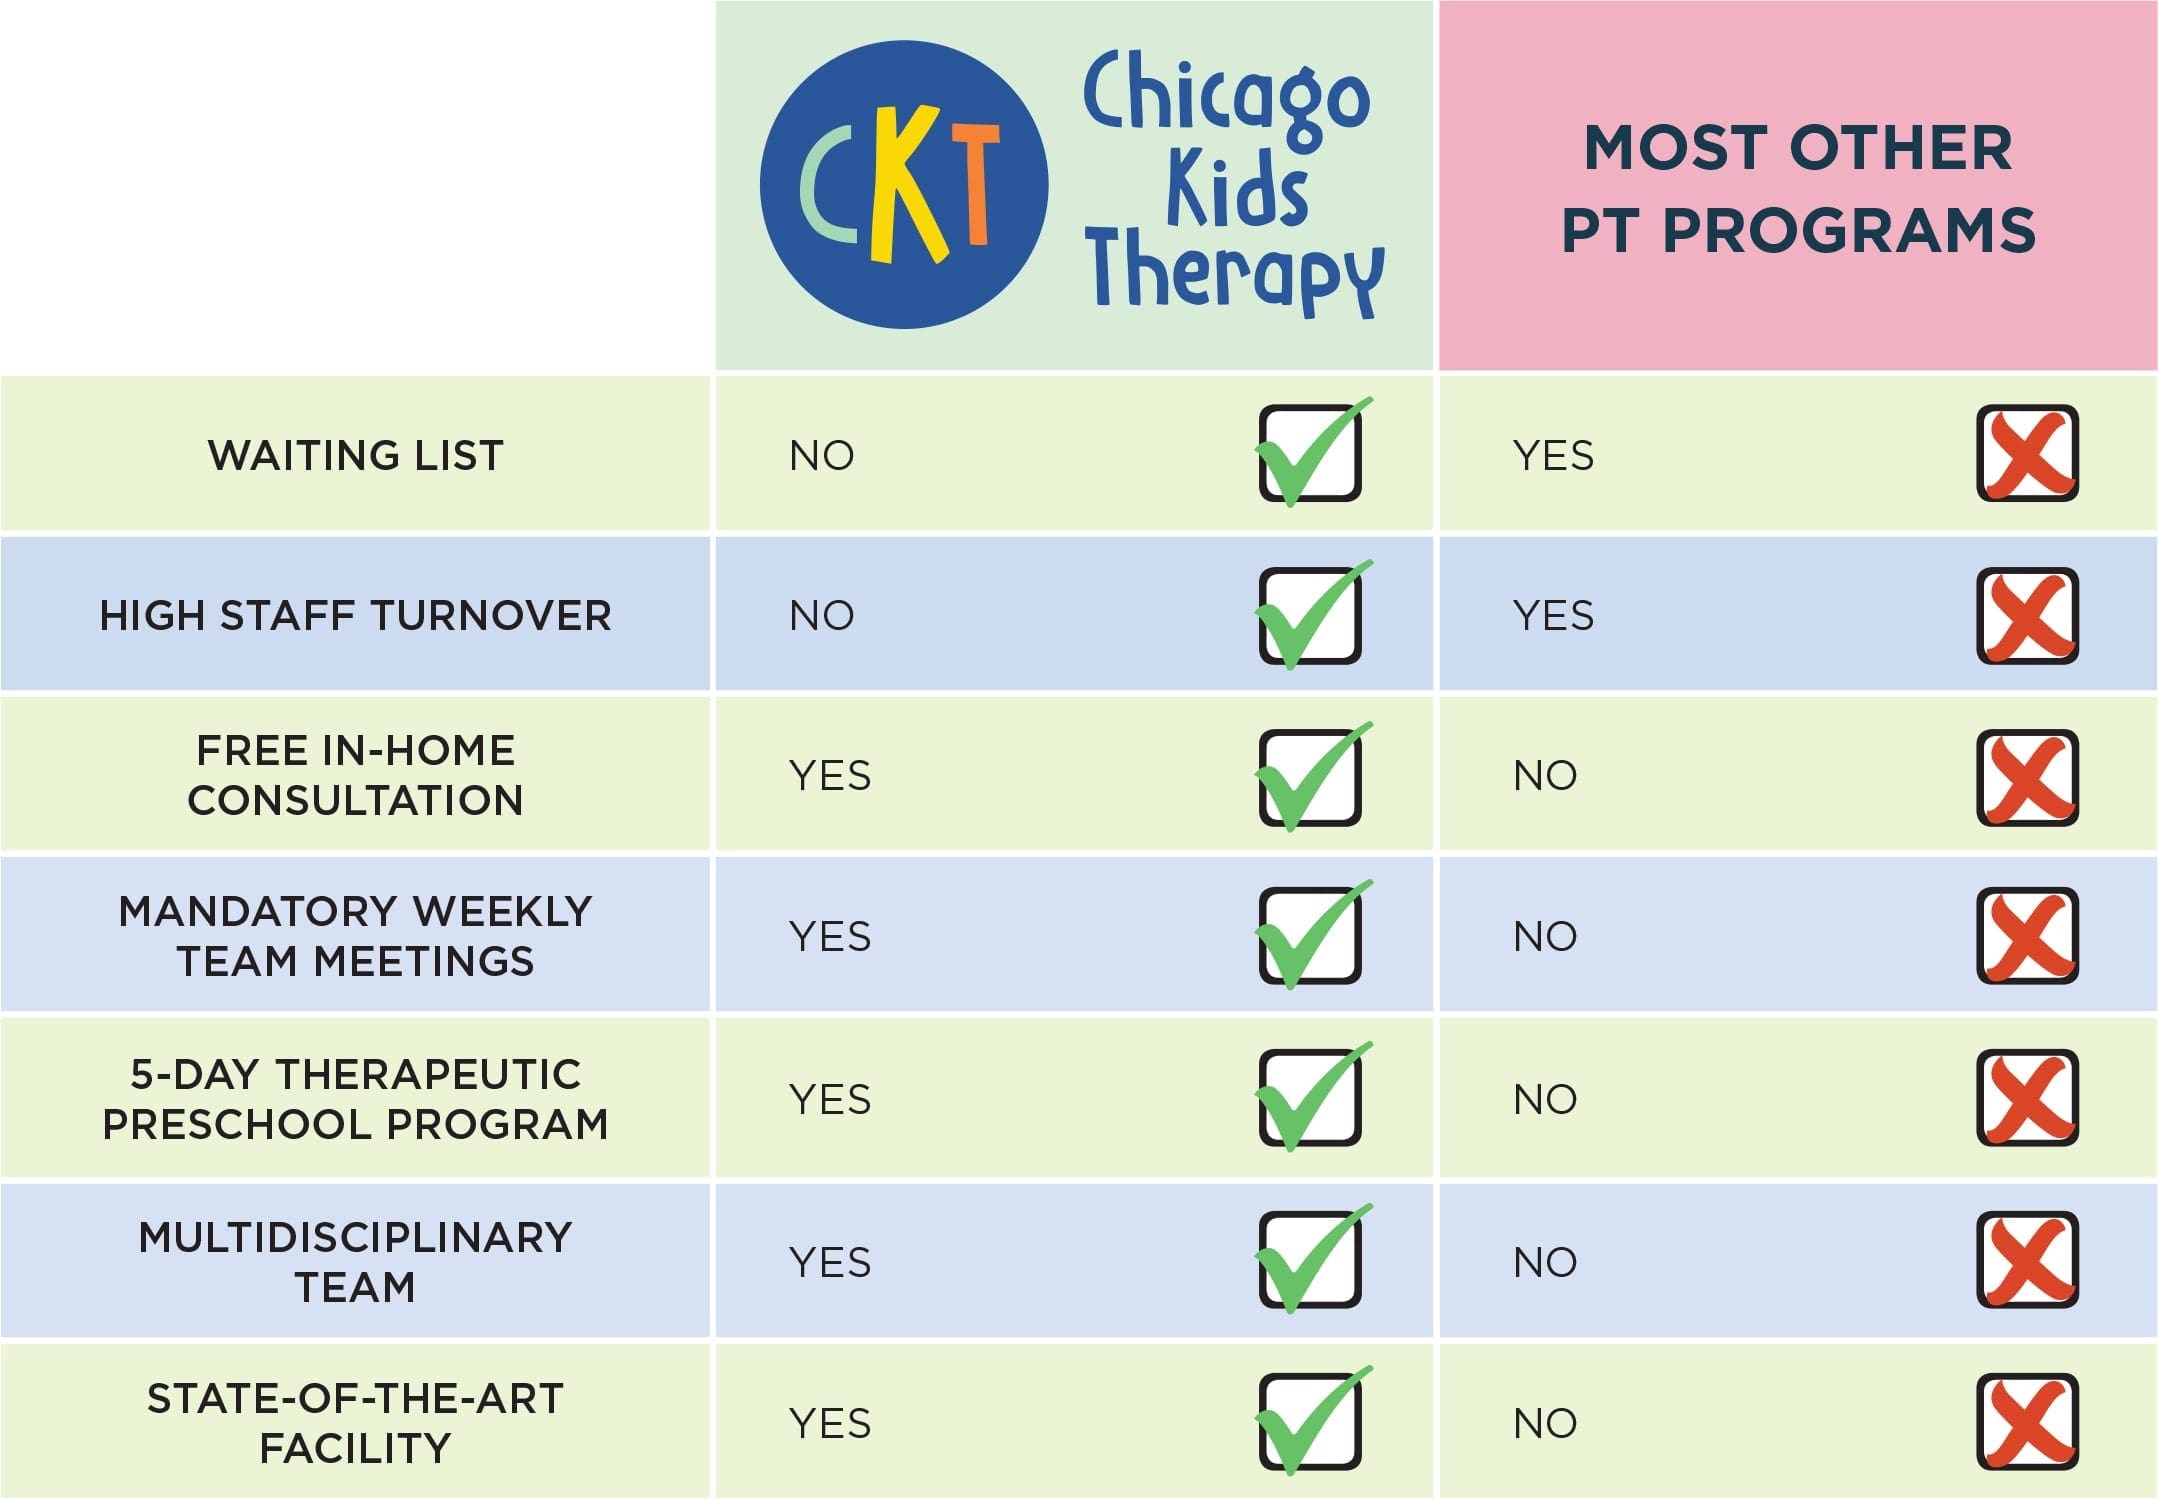 Chicago Kids Therapy vs Other Programs